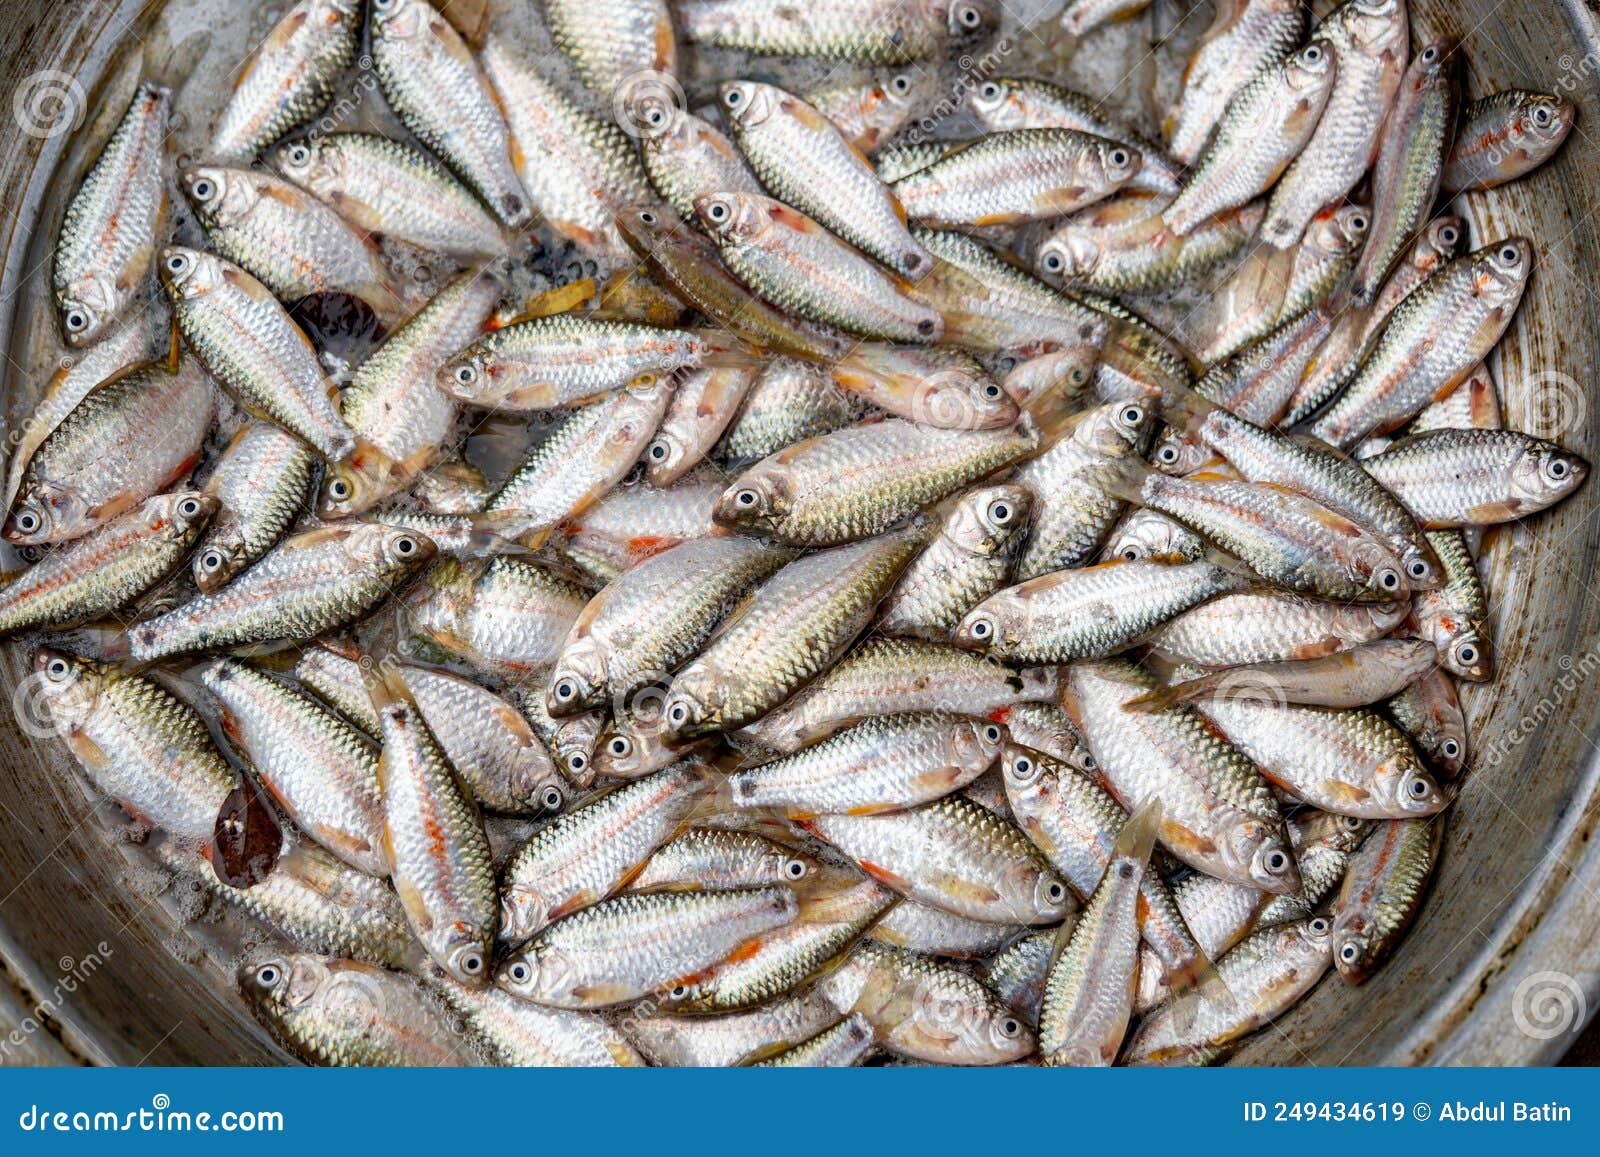 punti fish also known as putti fish.freshwater fish.